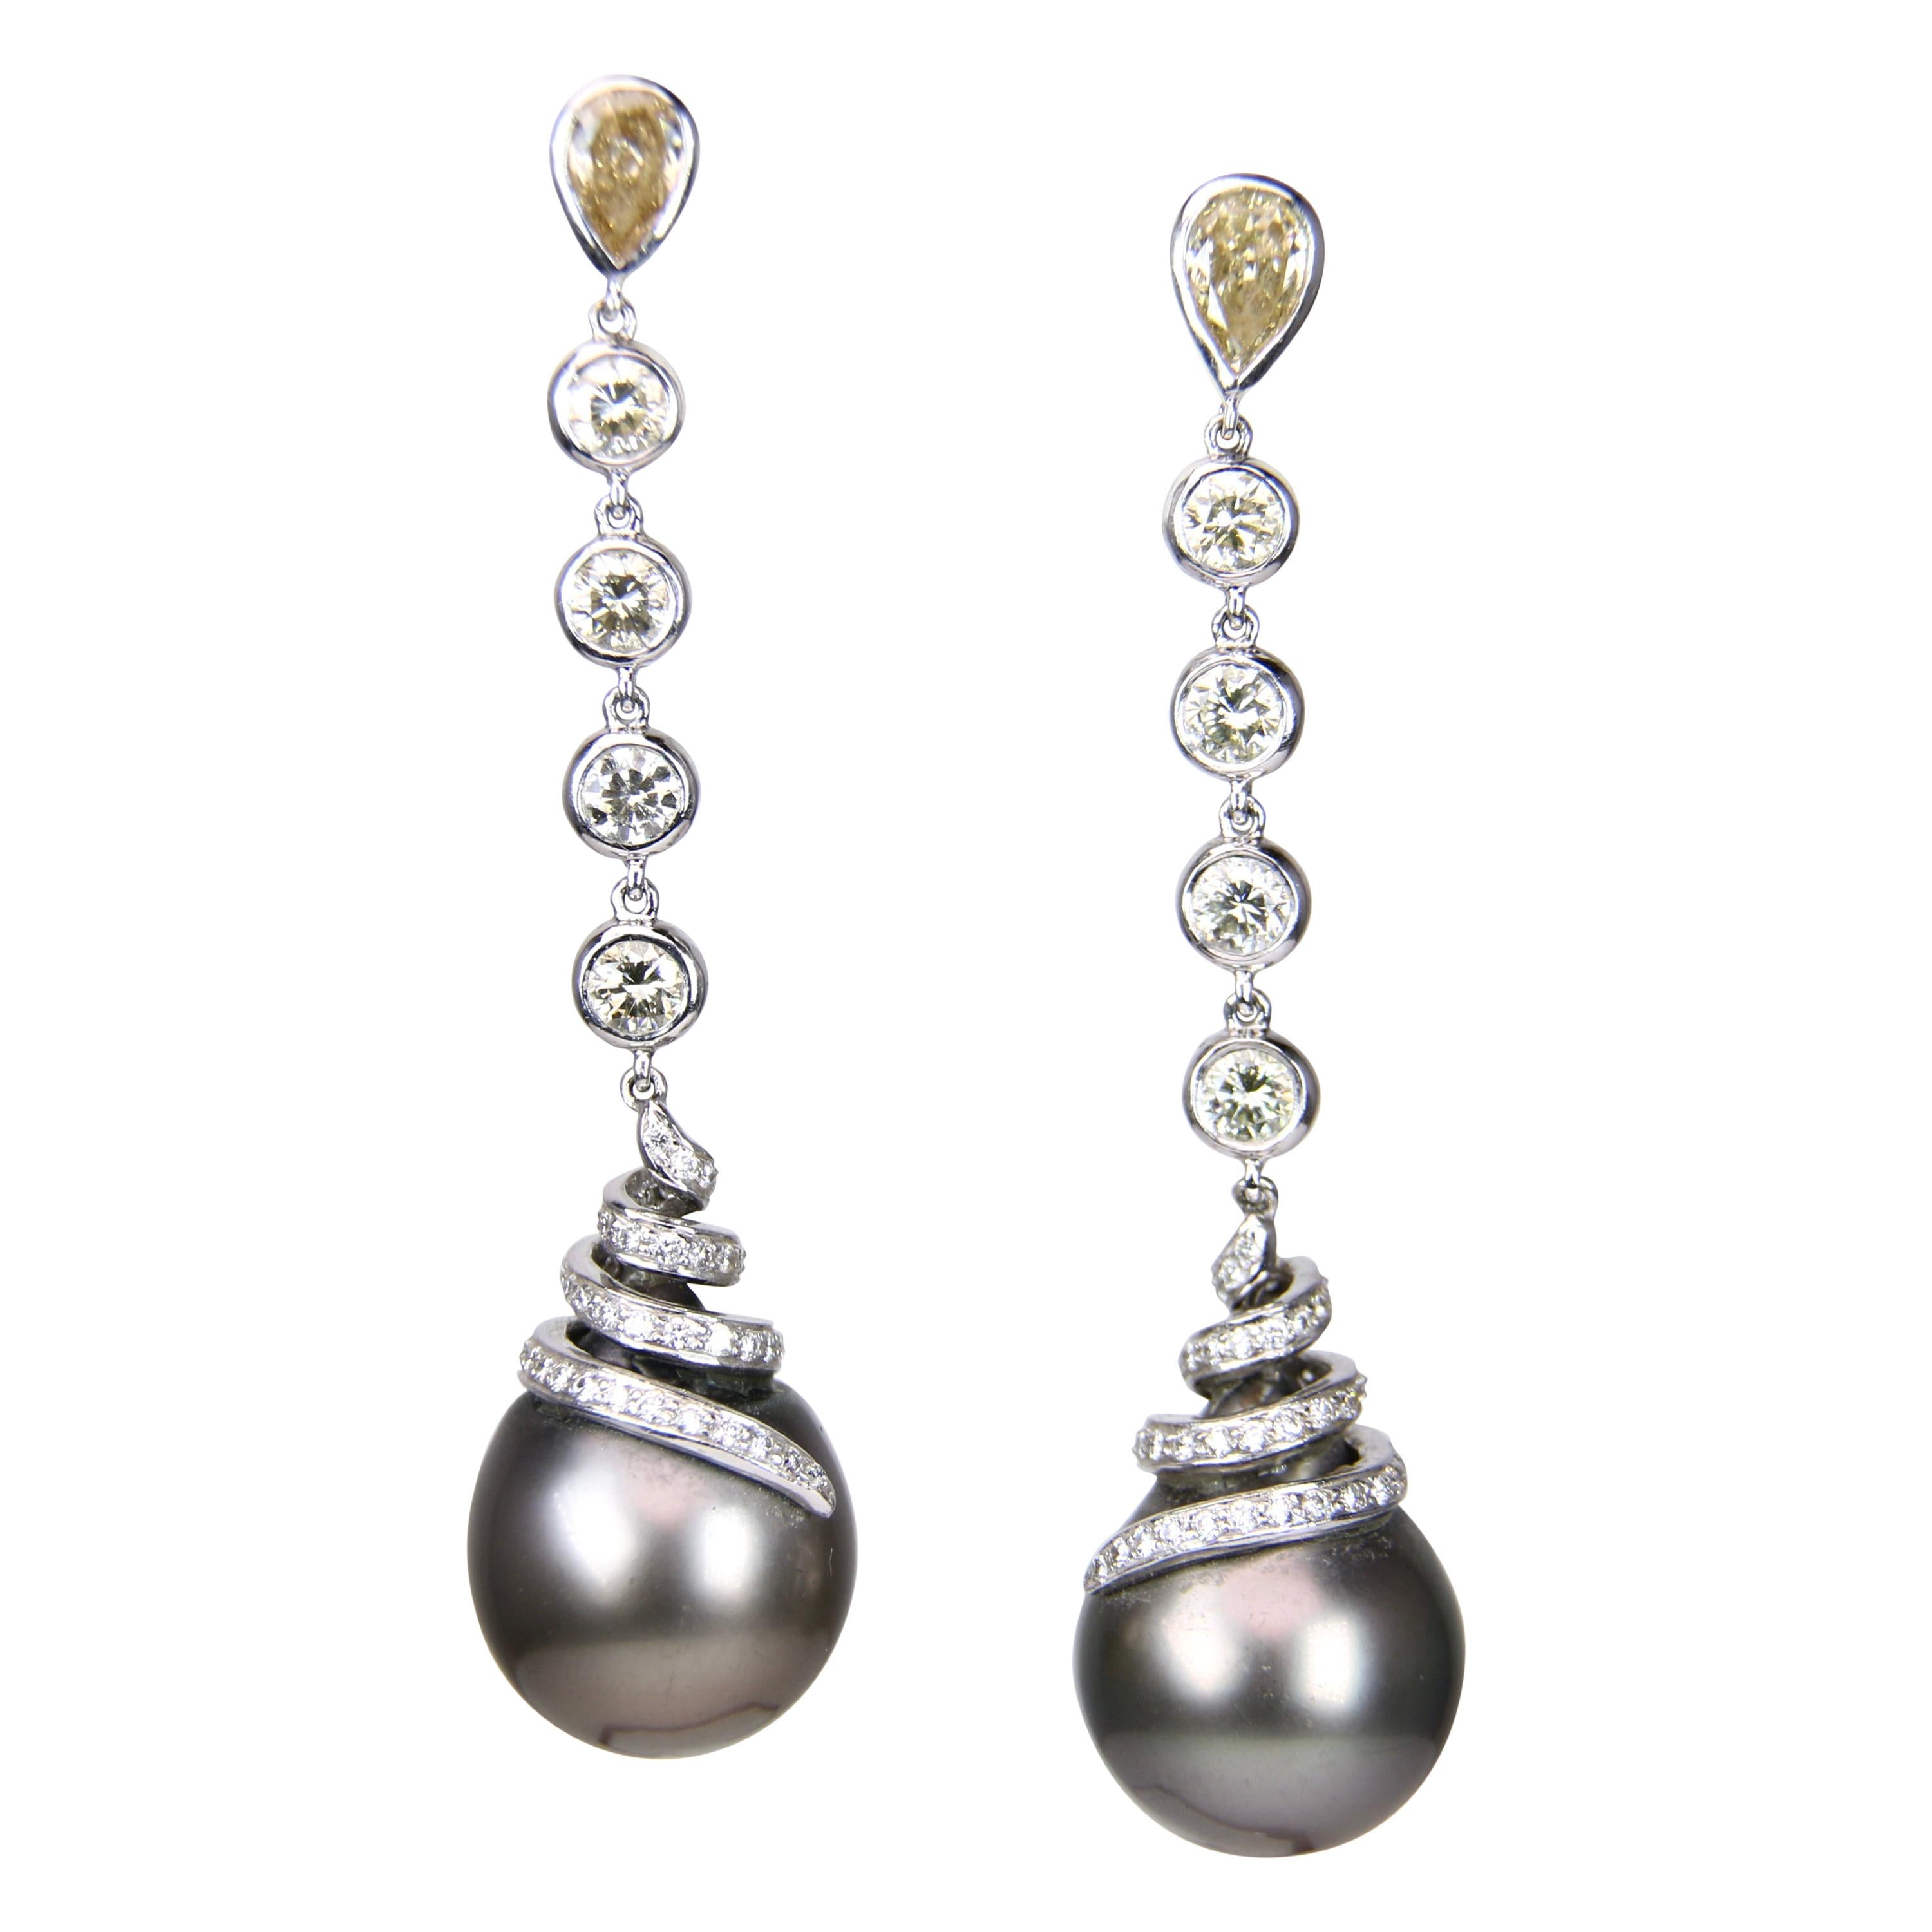 0.4IN x 0.3IN Sterling Silver 10-10.5mm Freshwater Cultured Button Pearl Yellow Earrings.